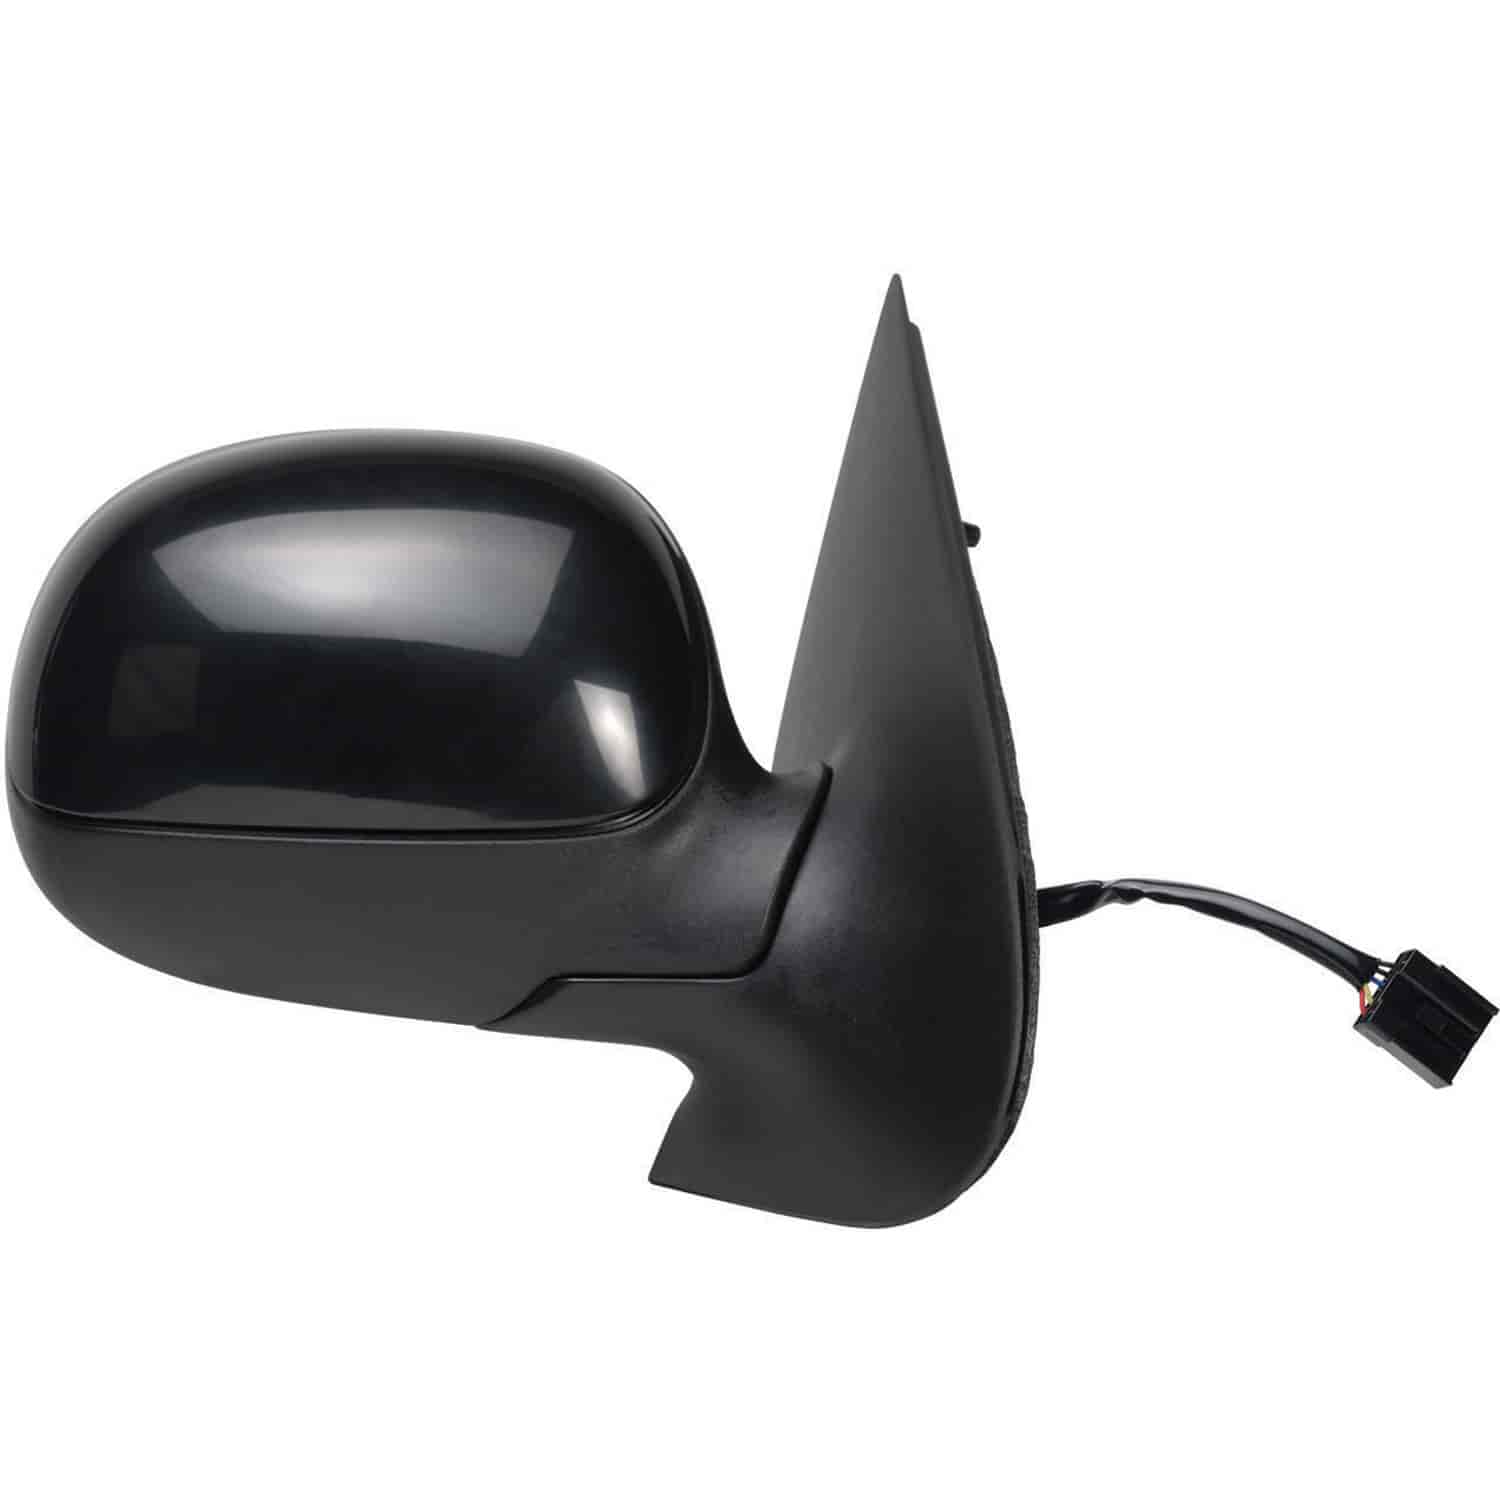 OEM Style Replacement mirror for 98-02 Exp/ Nav